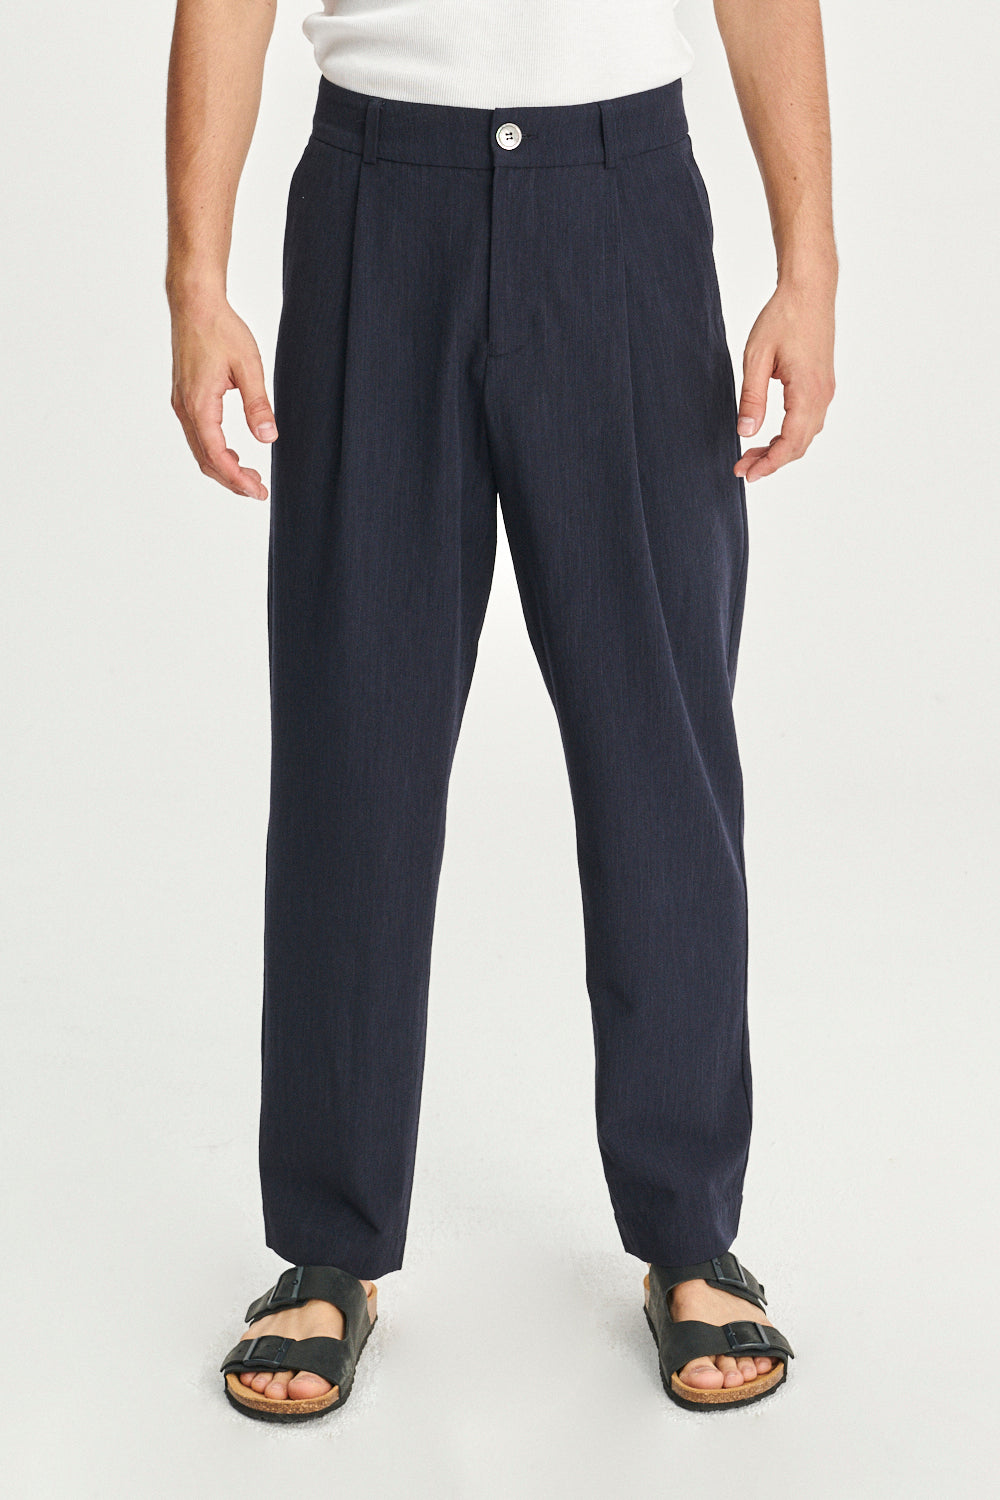 Genuine Trousers in a Navy Wool and Viscose Crepe